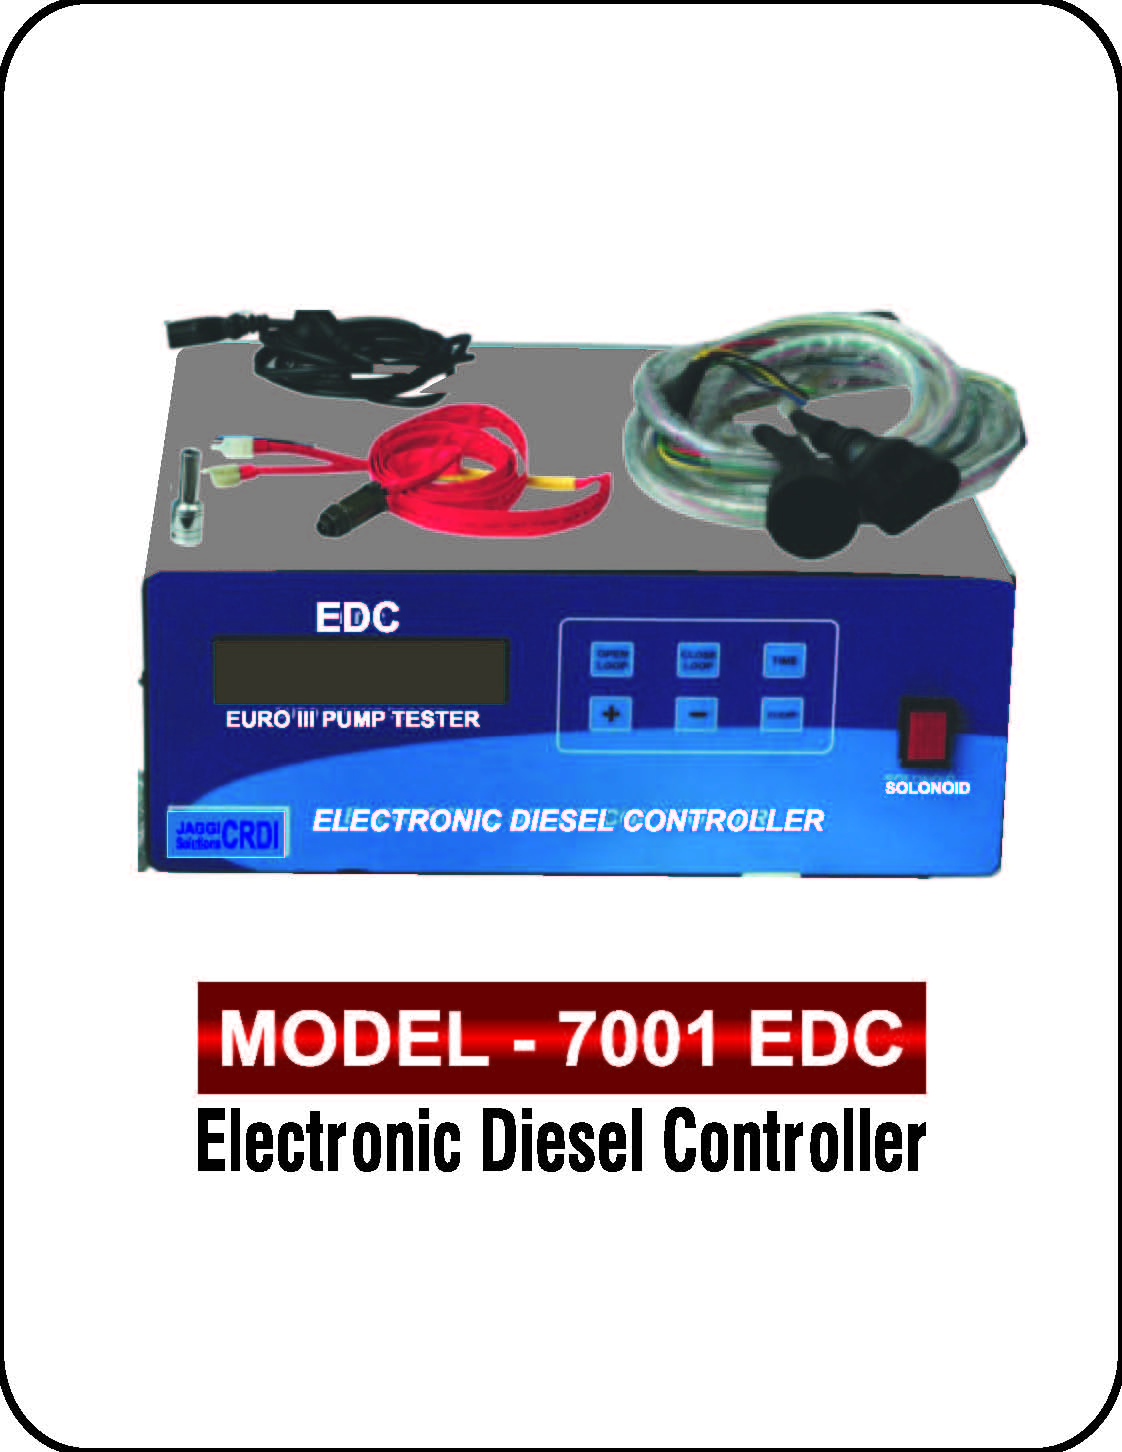 Electronic Diesel Control Systems